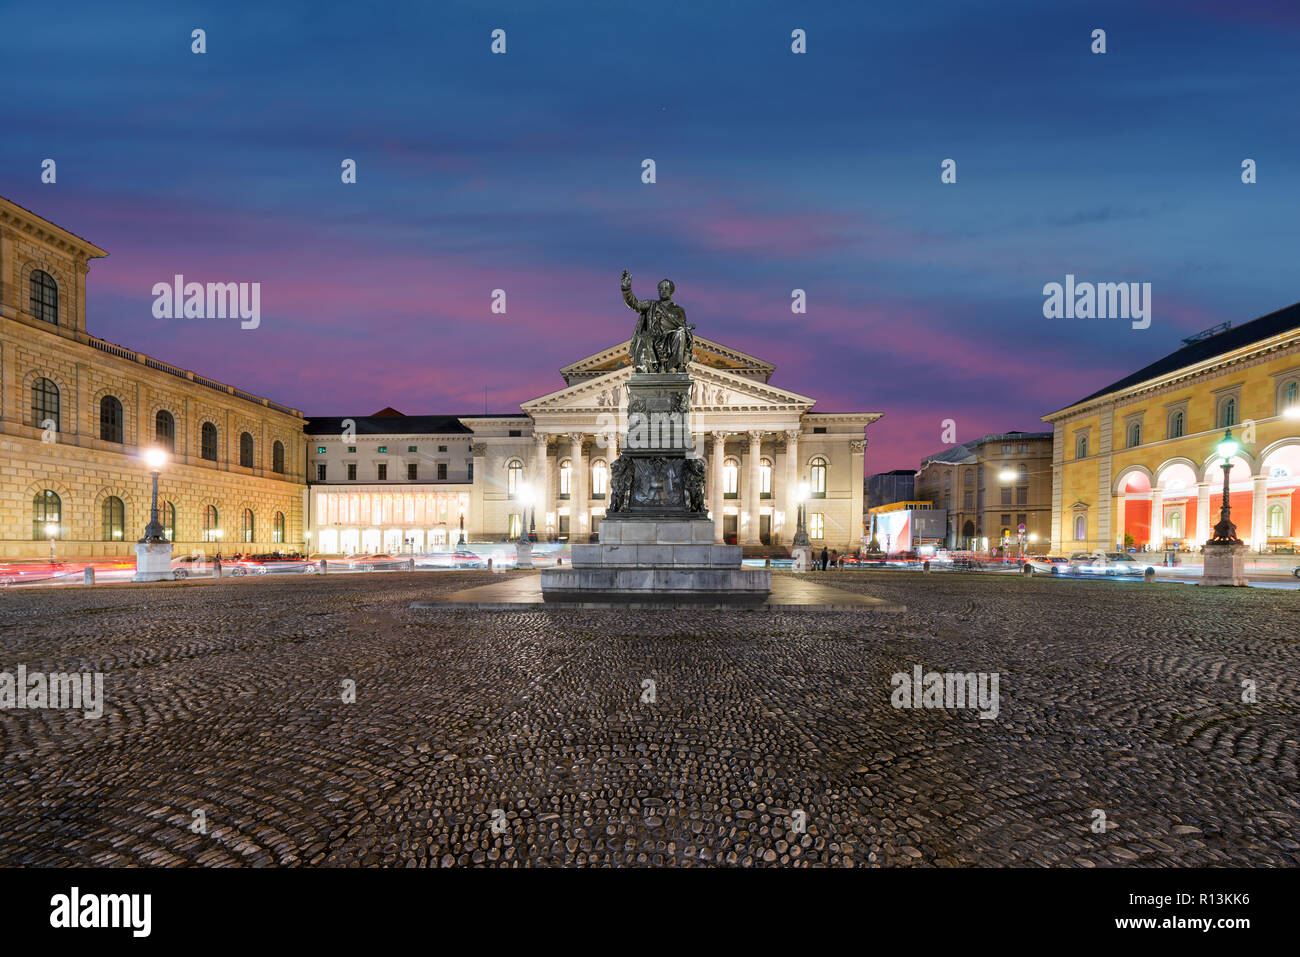 The National Theater of Munich, Located at Max-Joseph-Platz Square in Munich, Bavaria, Germany. Stock Photo